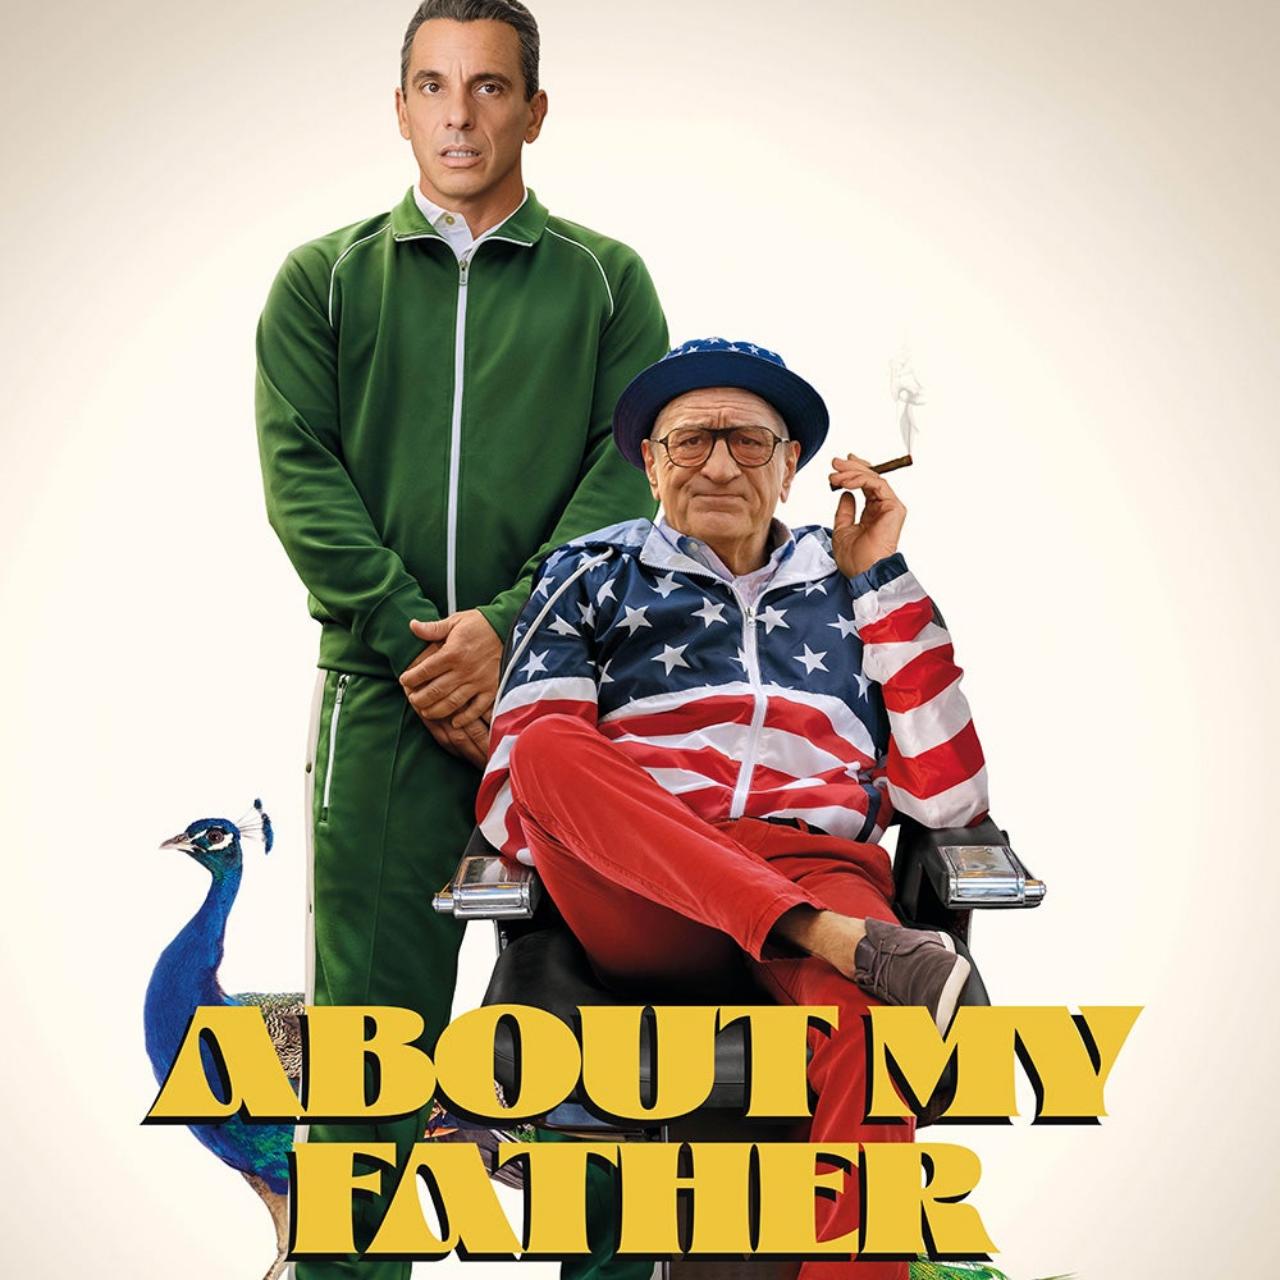 About My Father: This film must-watch light-hearted comedy starring legendary Italian-American and two-time Oscar winner, Robert De Niro, and Sebastian Maniscalco. The film centres around the latter who is encouraged by his fiancée (Leslie Bibb) to bring his immigrant, hairdresser father, Salvo (De Niro), to a weekend get-together with her super-rich and exceedingly eccentric family. The gathering quickly turns into a cultural conflict, allowing the father-son duo to understand the true meaning of family. The film is slated to release on May 26.
 